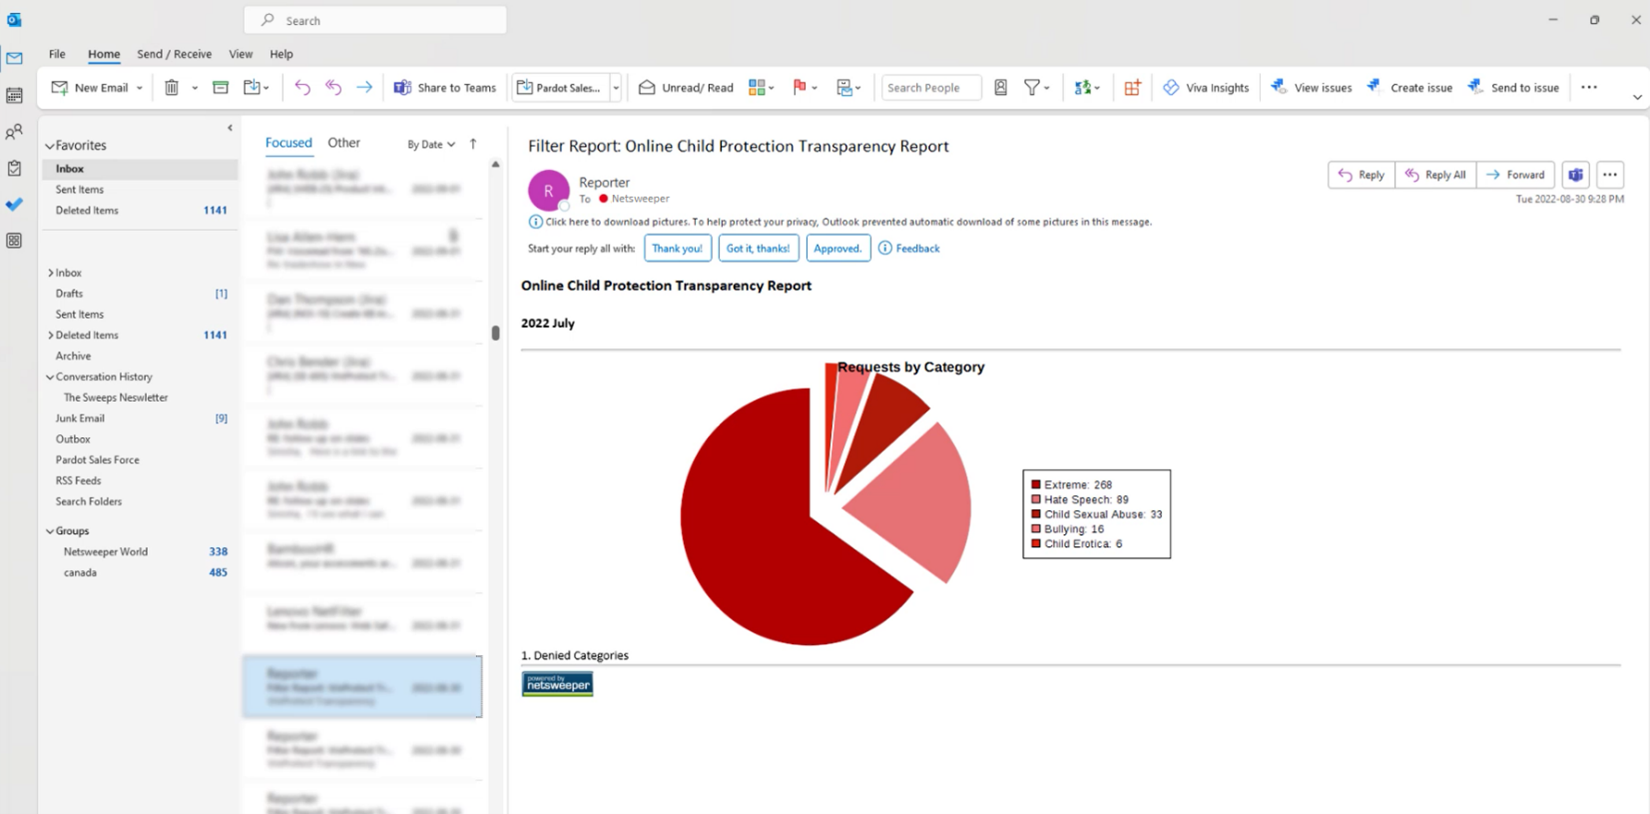 Online Child Protection Transparency Report